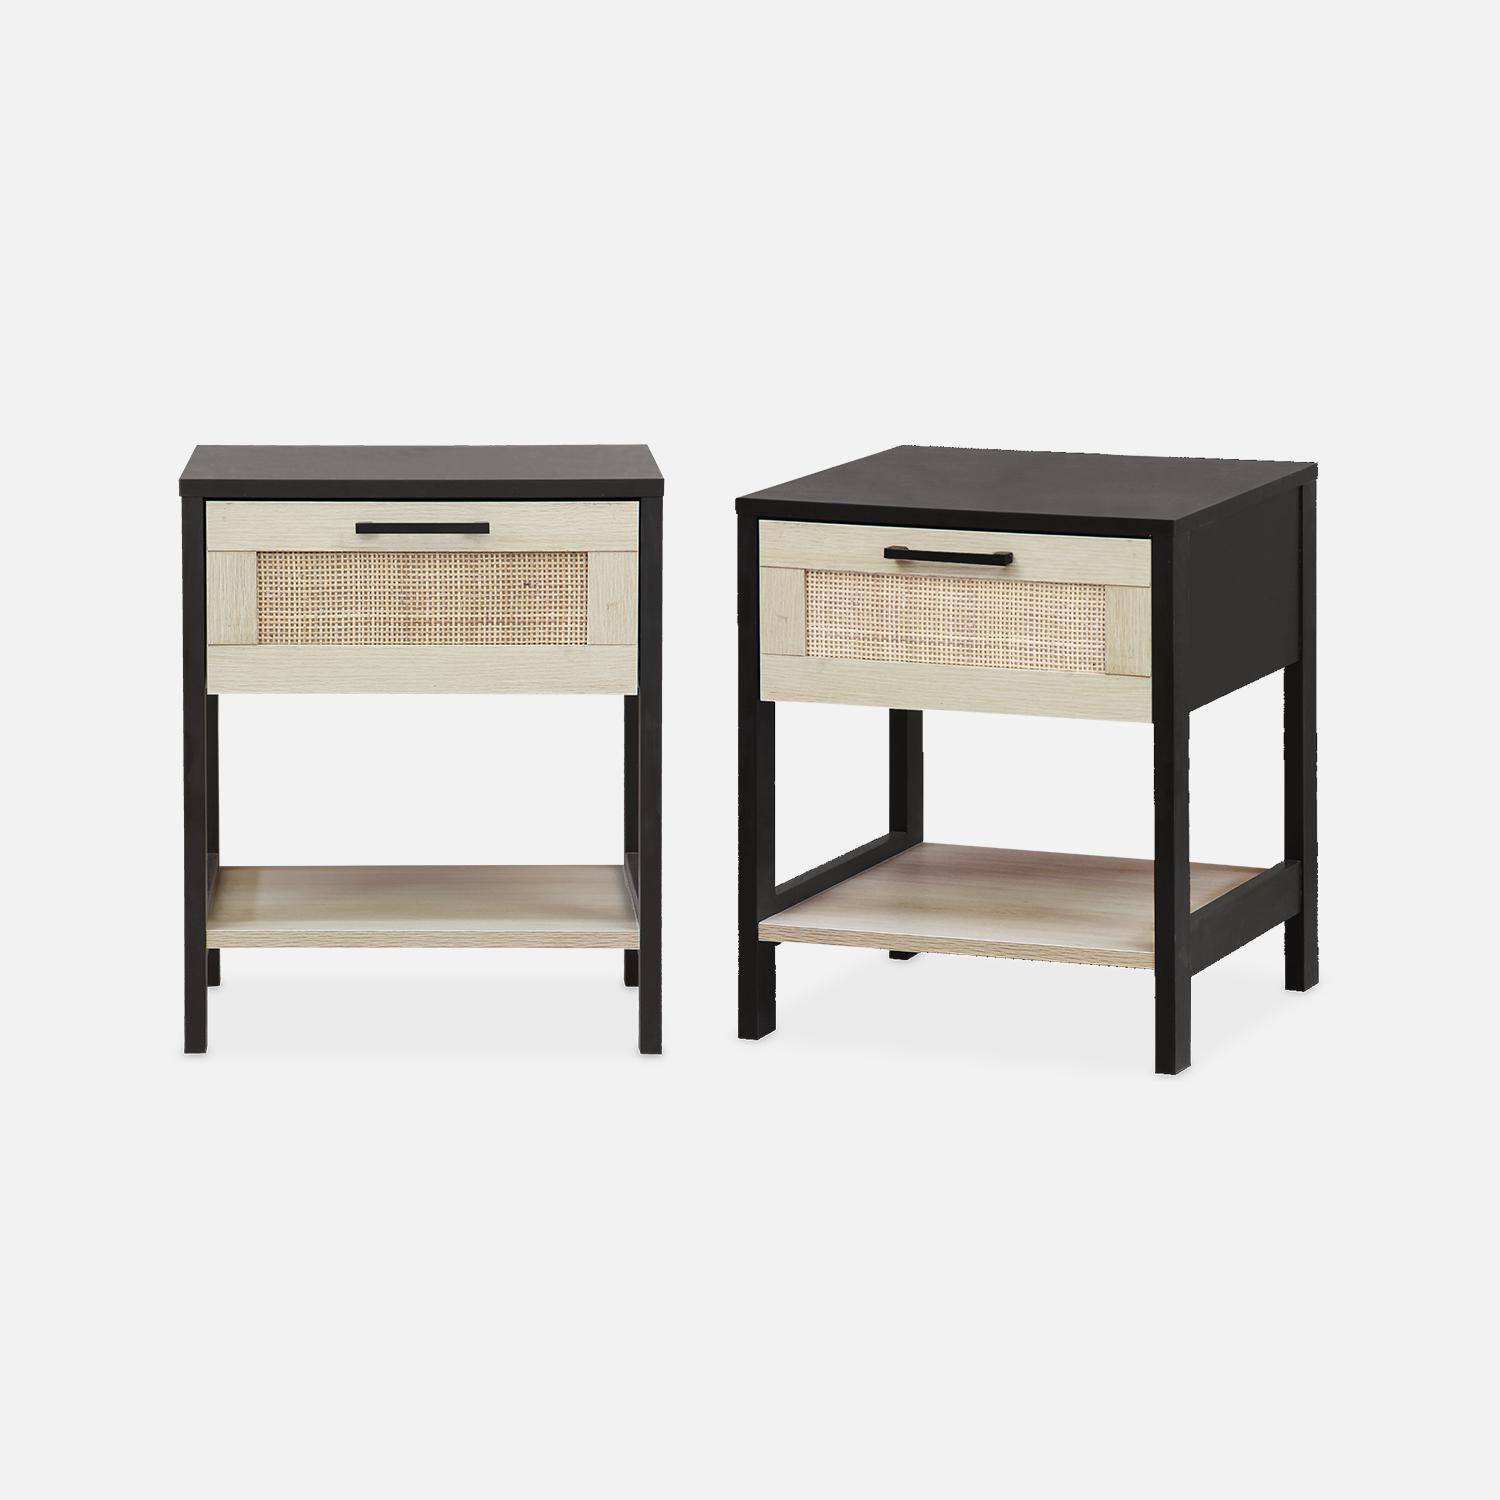 Pair of cane rattan bedside tables with drawer, 40x40x48cm - Bianca - Black,sweeek,Photo2